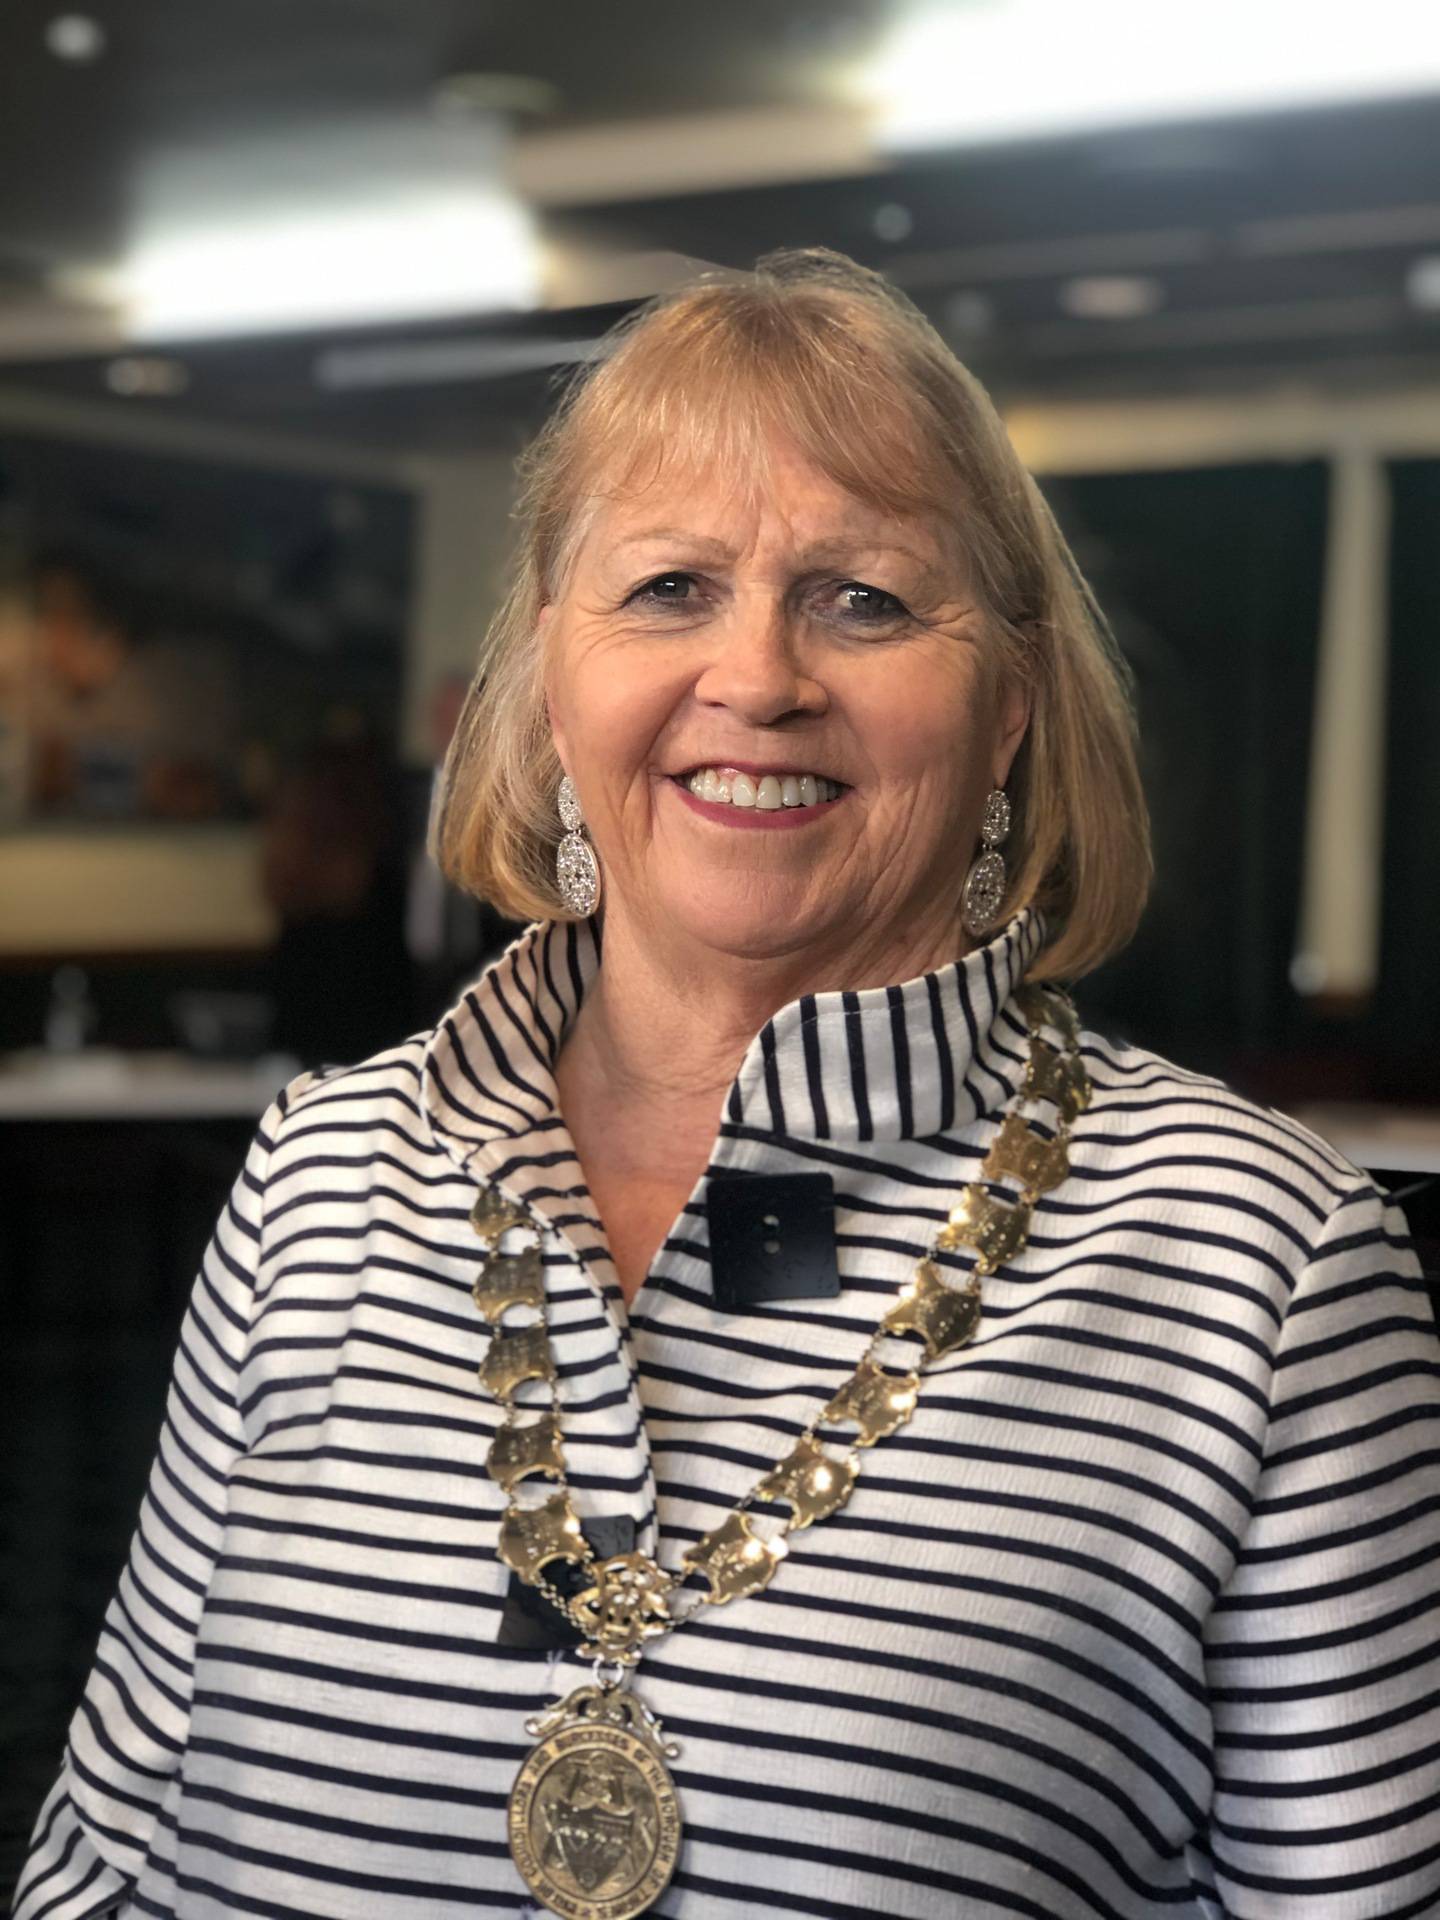 Thames-Coromandel District Mayor Sandra Goudie says getting the vaccine or not is a personal choice, and people should respect each other's opinions. Photo / Alison Smith